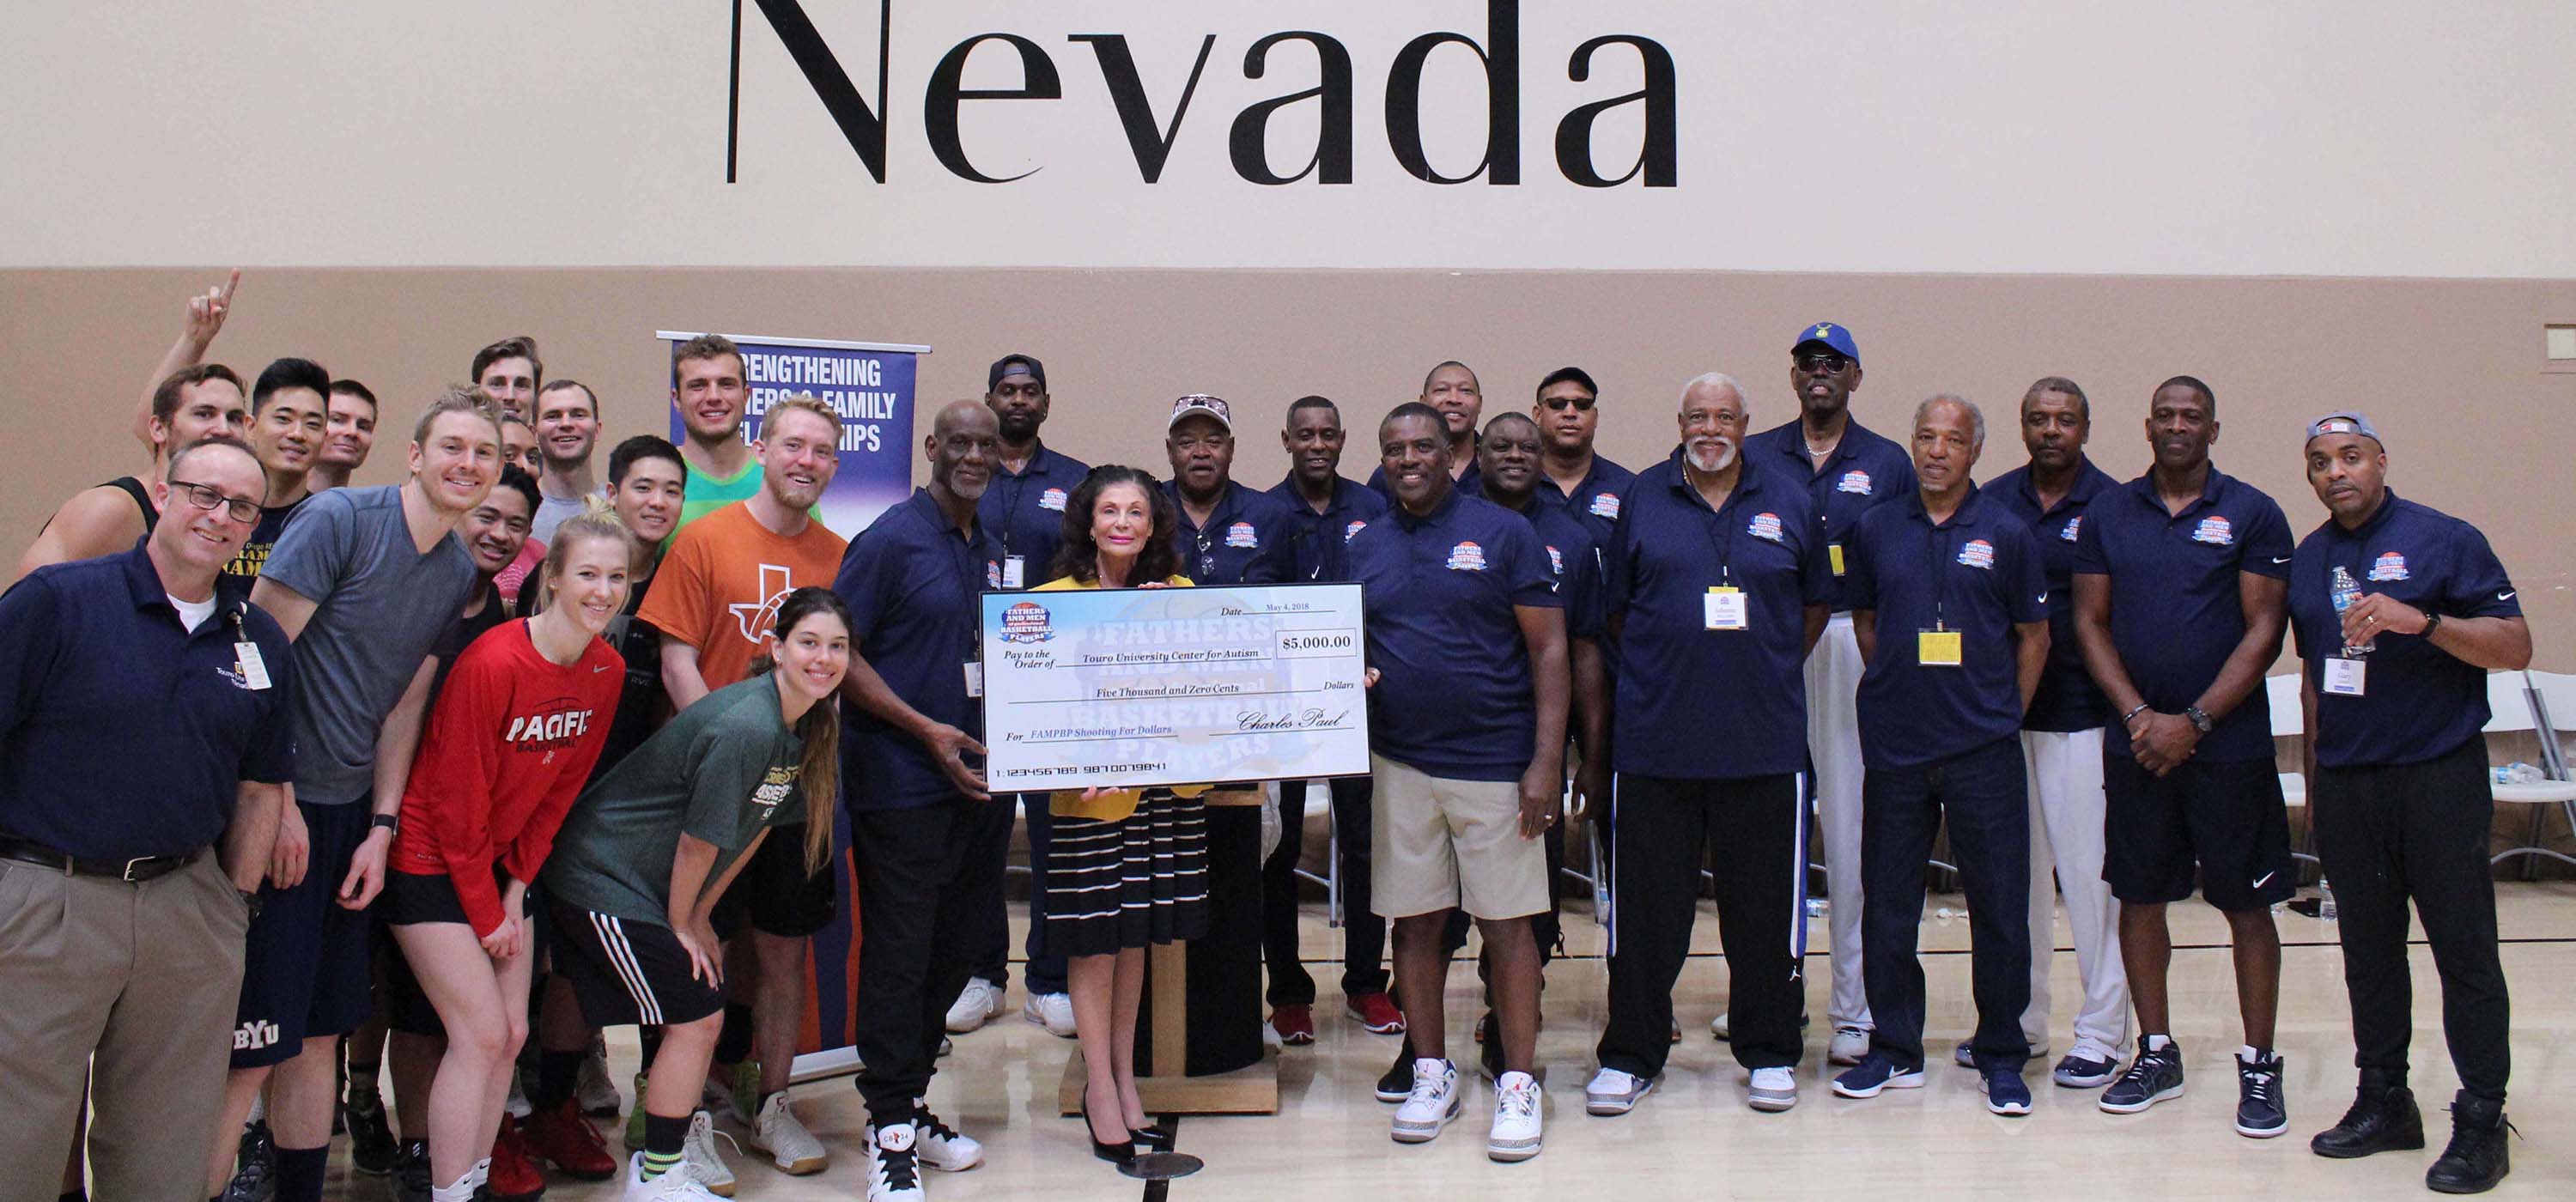 The fathers of NBA greats on the basketball court with the Touro Nevada team. 